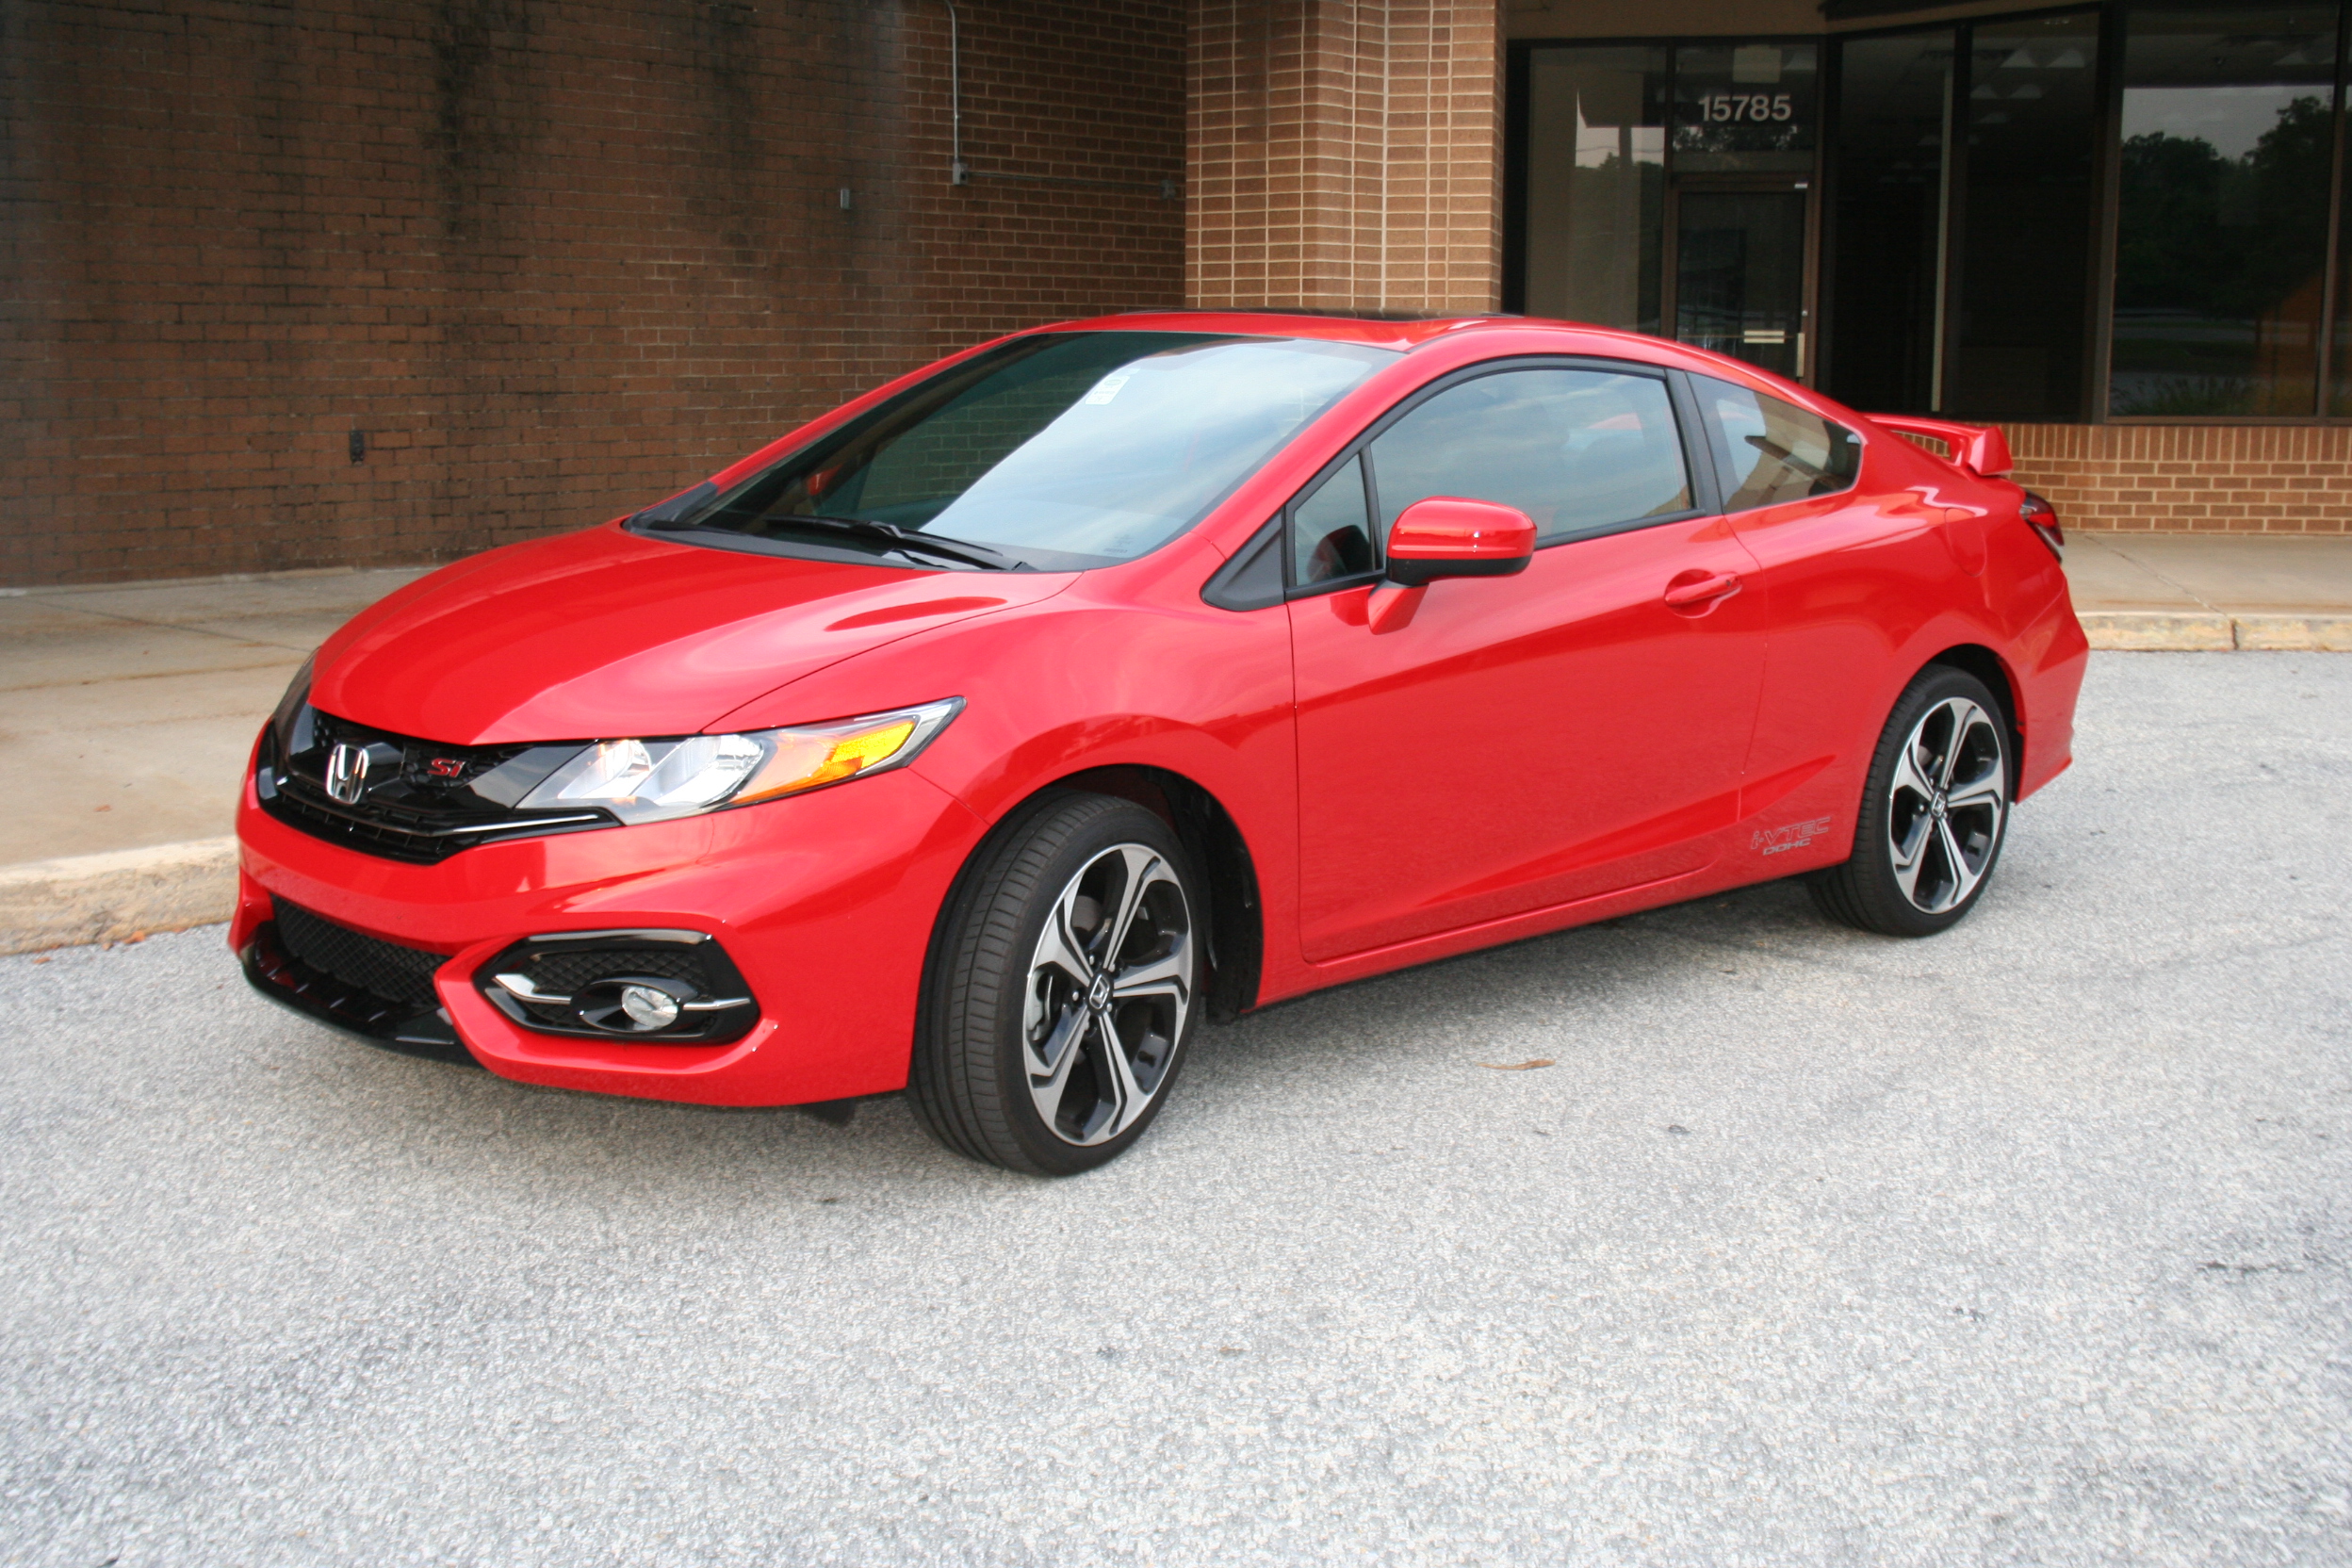 Car Report: 2014 Honda Civic SI Coupe is fun to drive, with a rare manual transmission